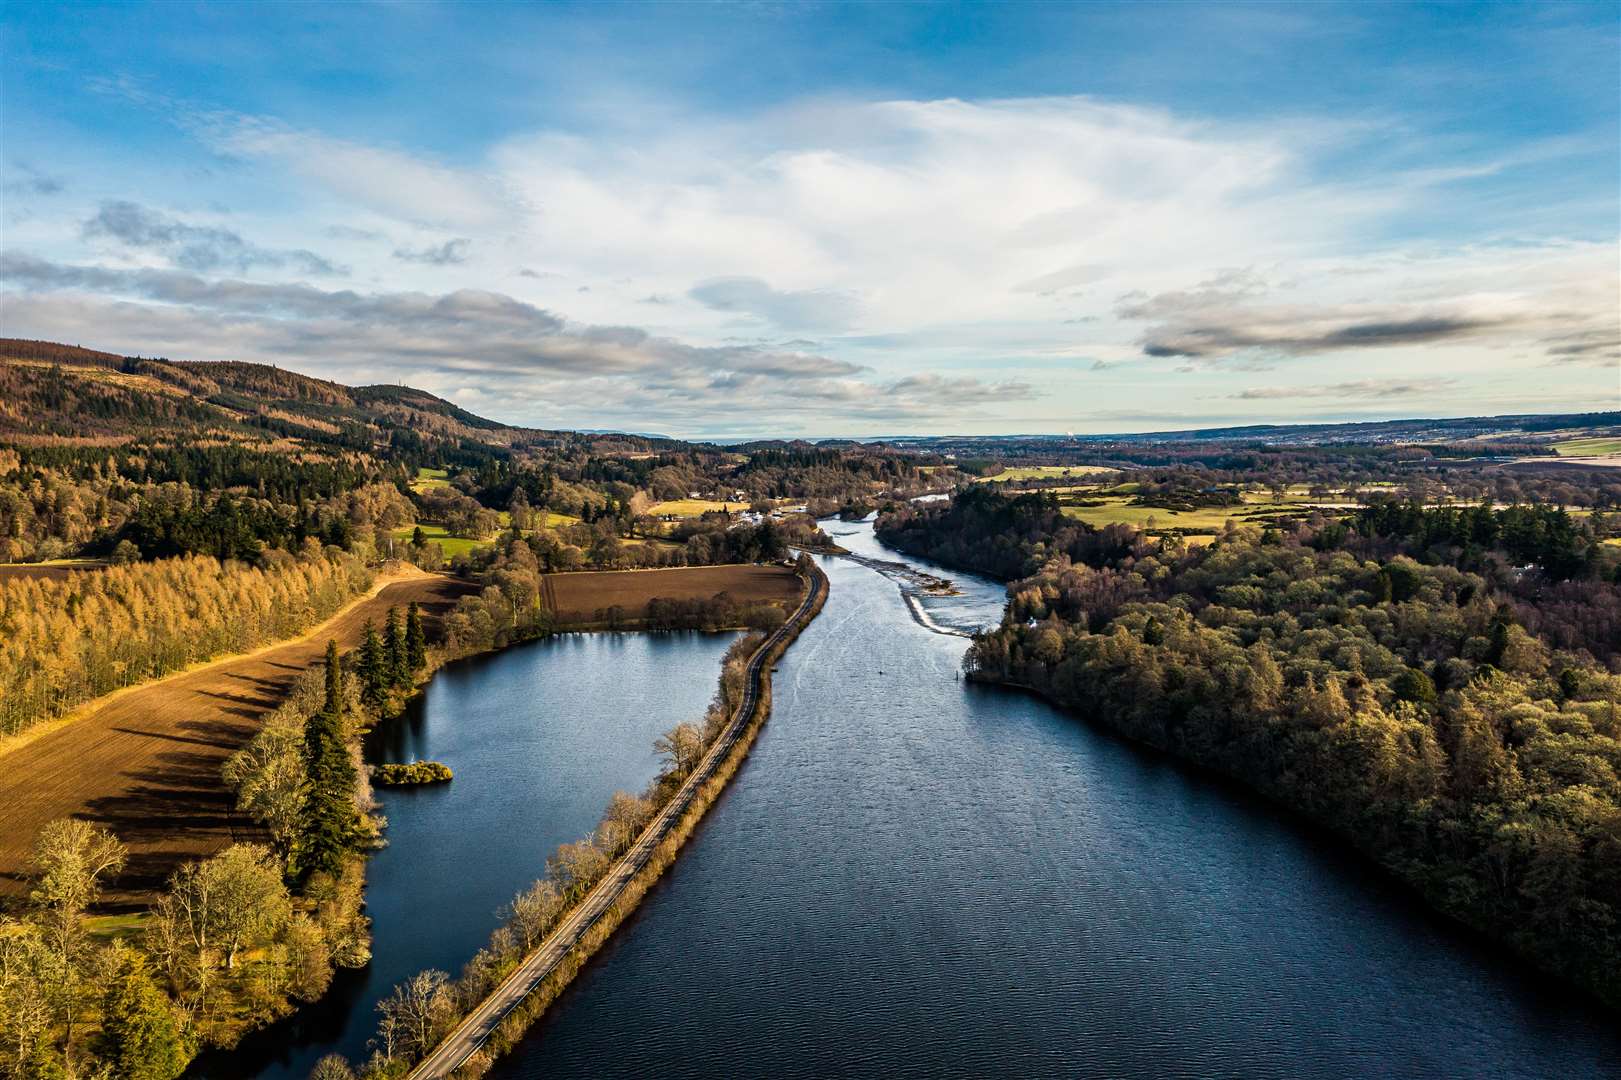 A drone captures the sheer scale of the Caledonian Canal at Dochgarroch.